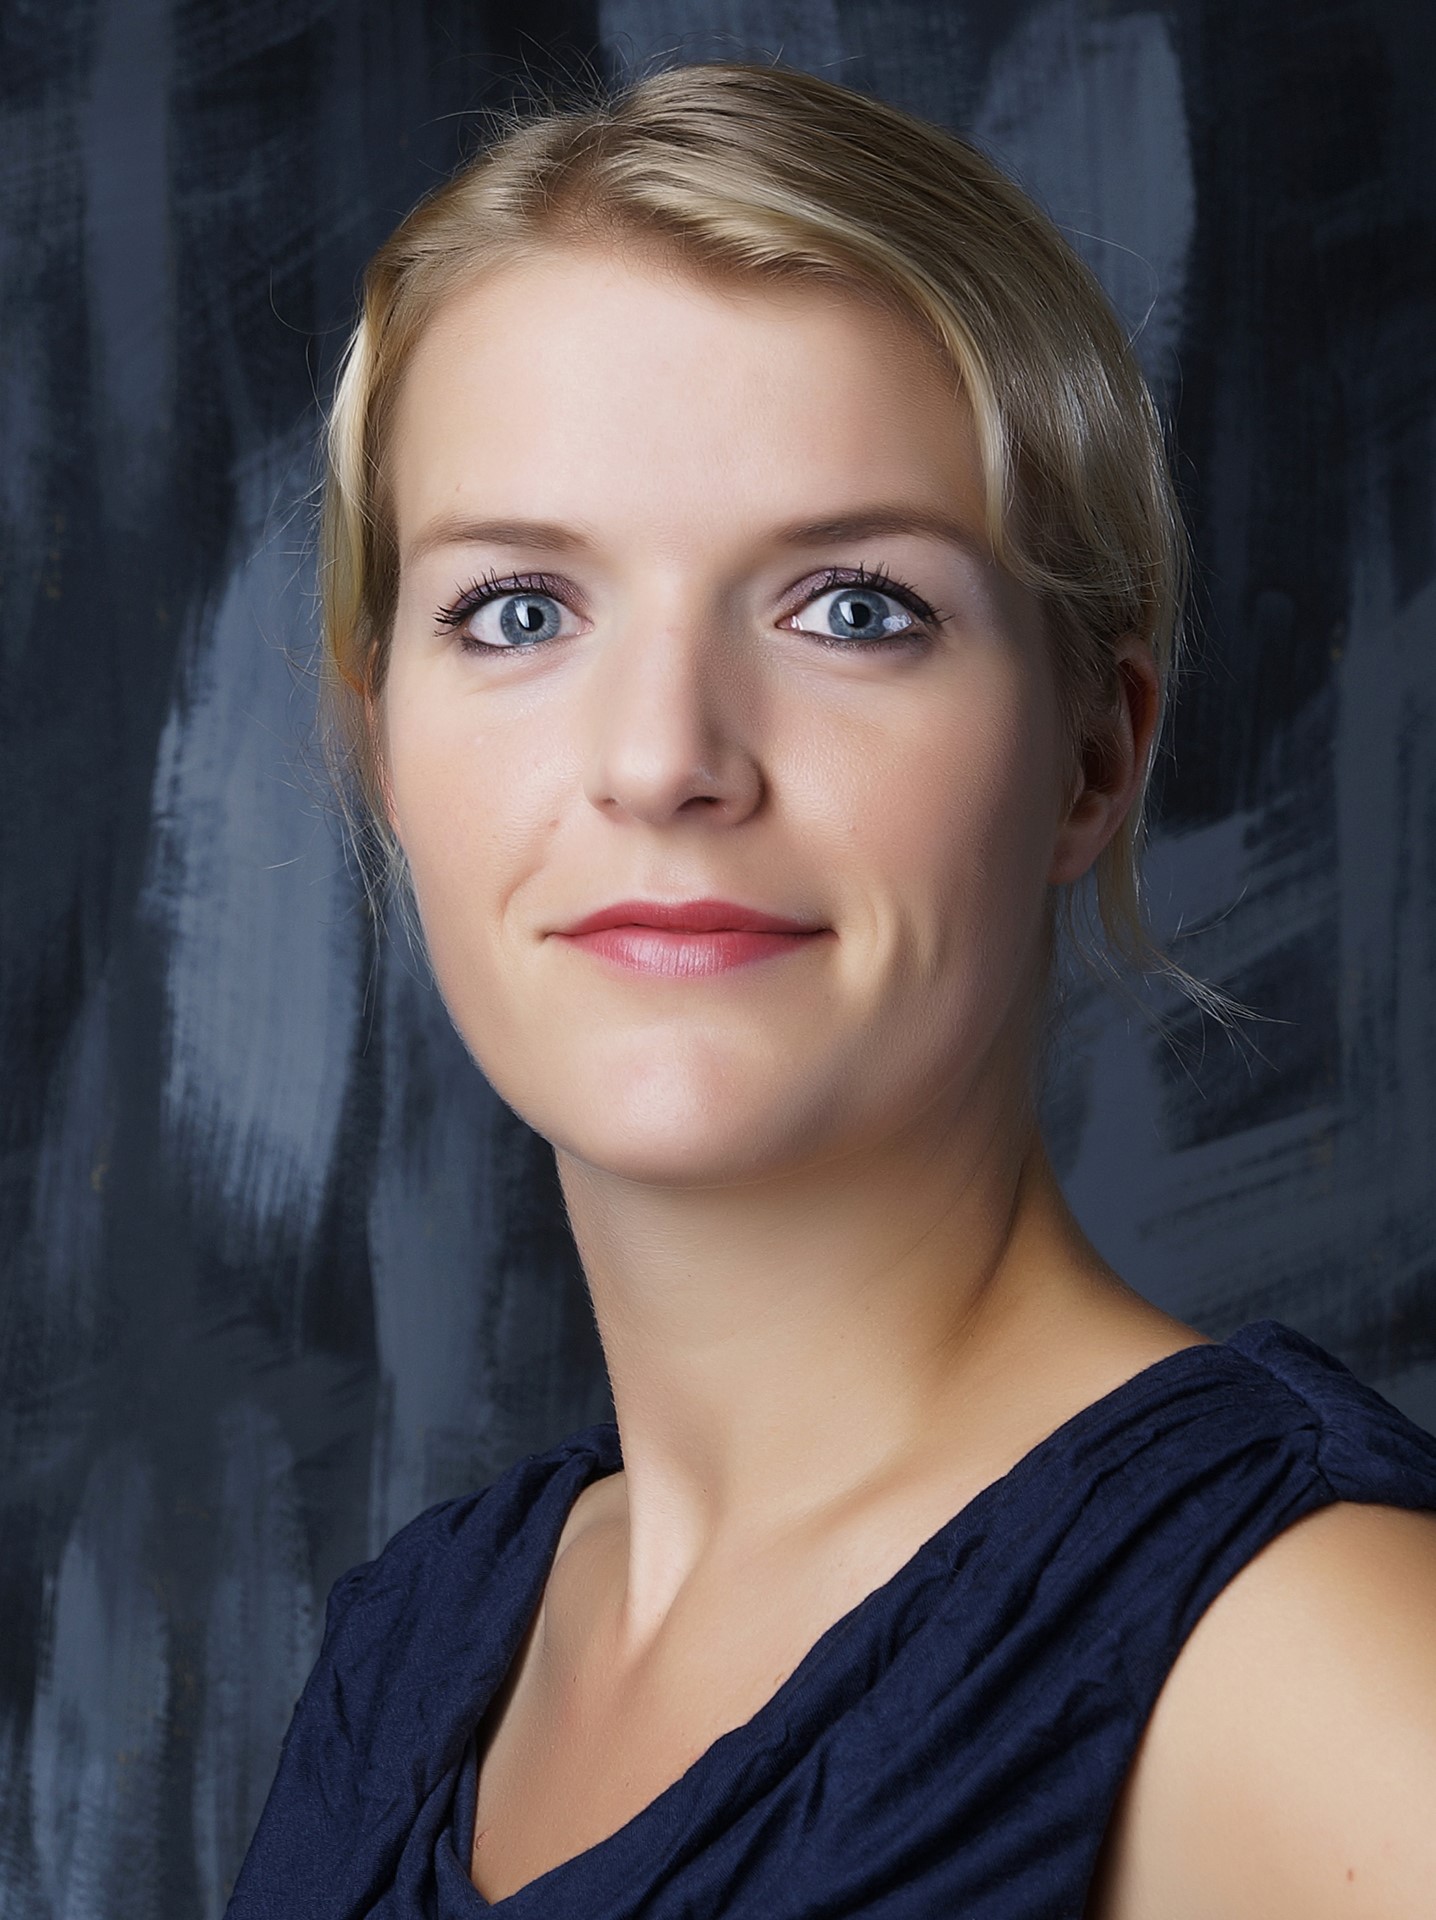 martine rooth ceo solvo groep 6mb website